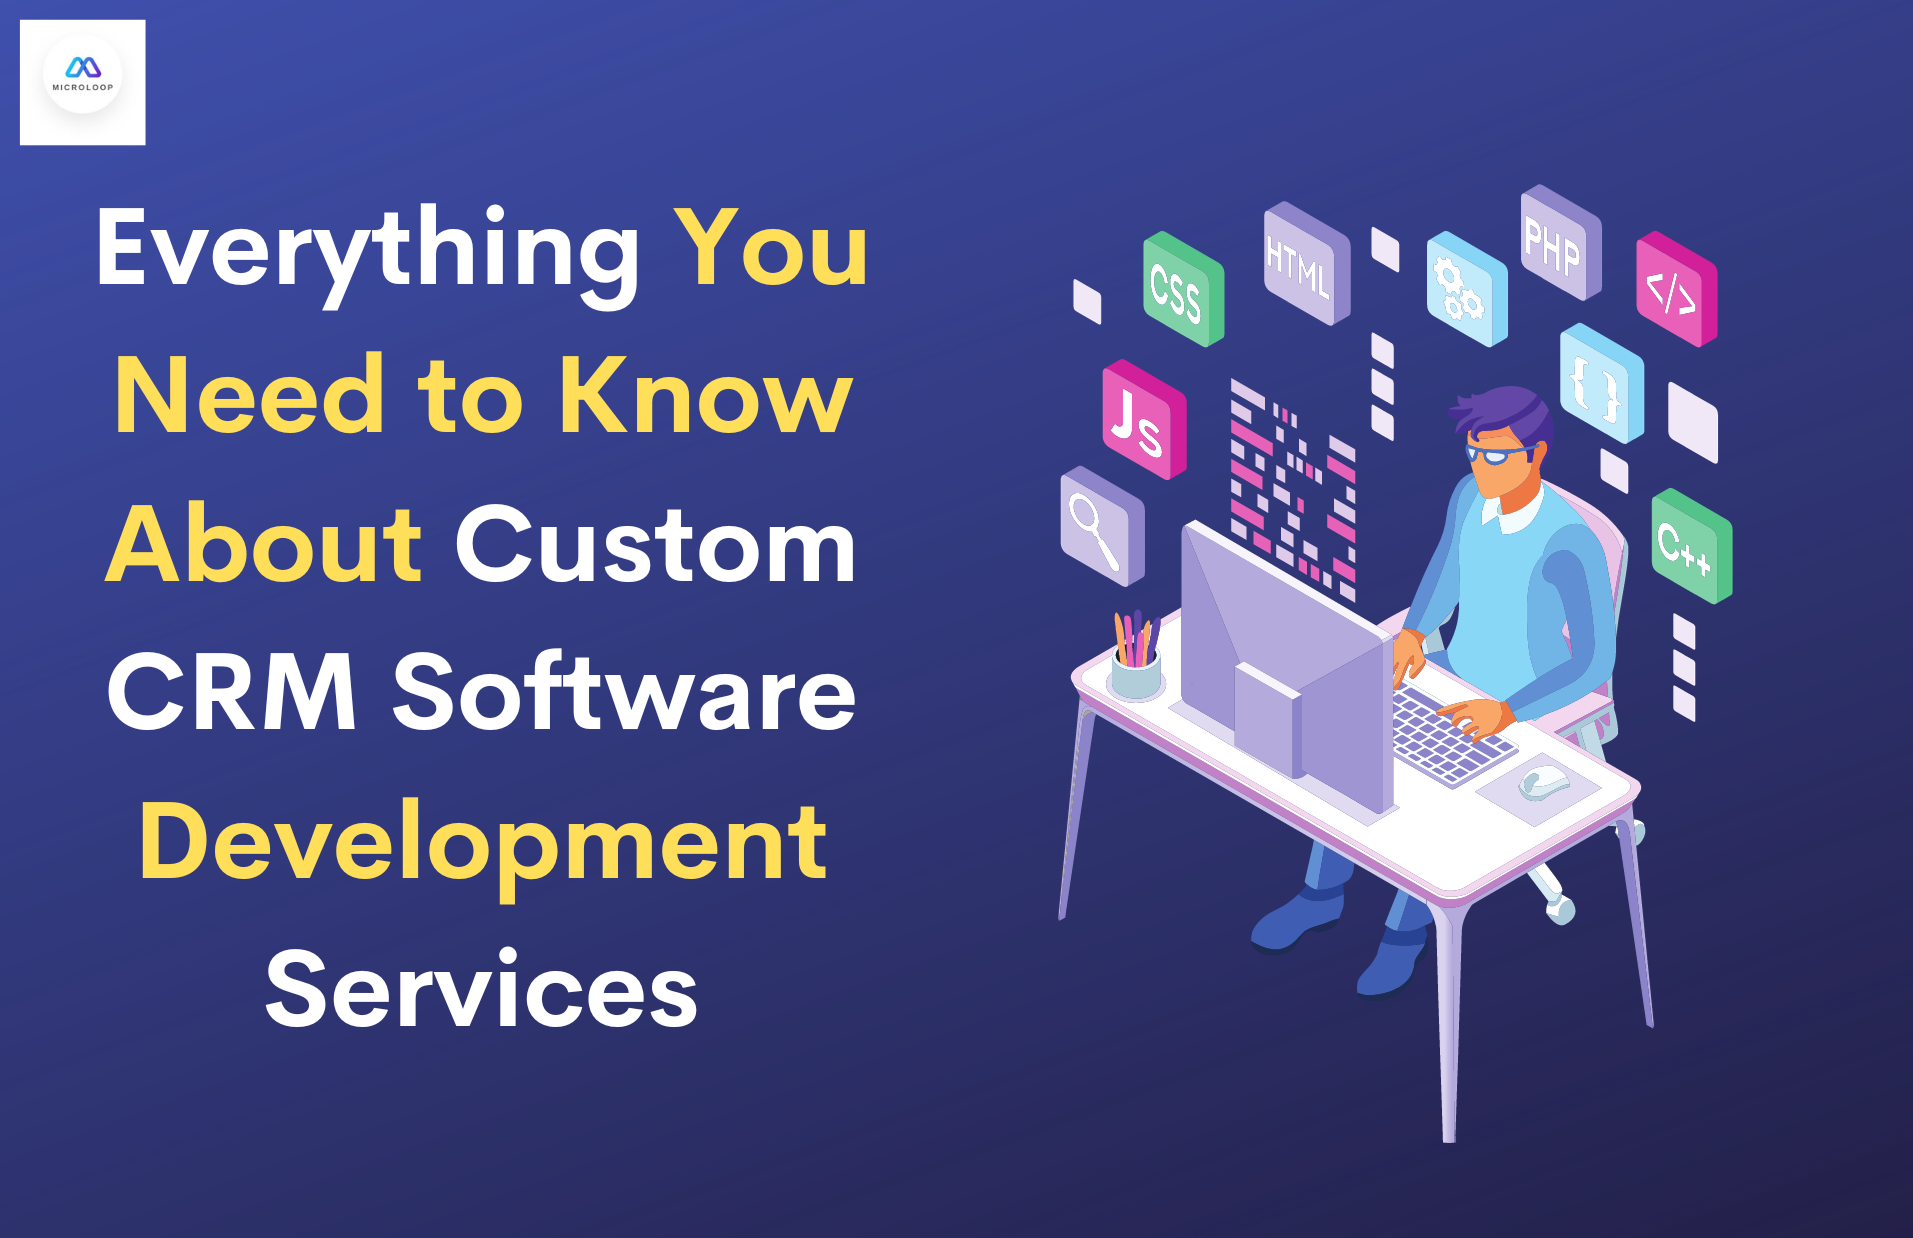 Everything You Need to Know About Custom CRM Software Development Services